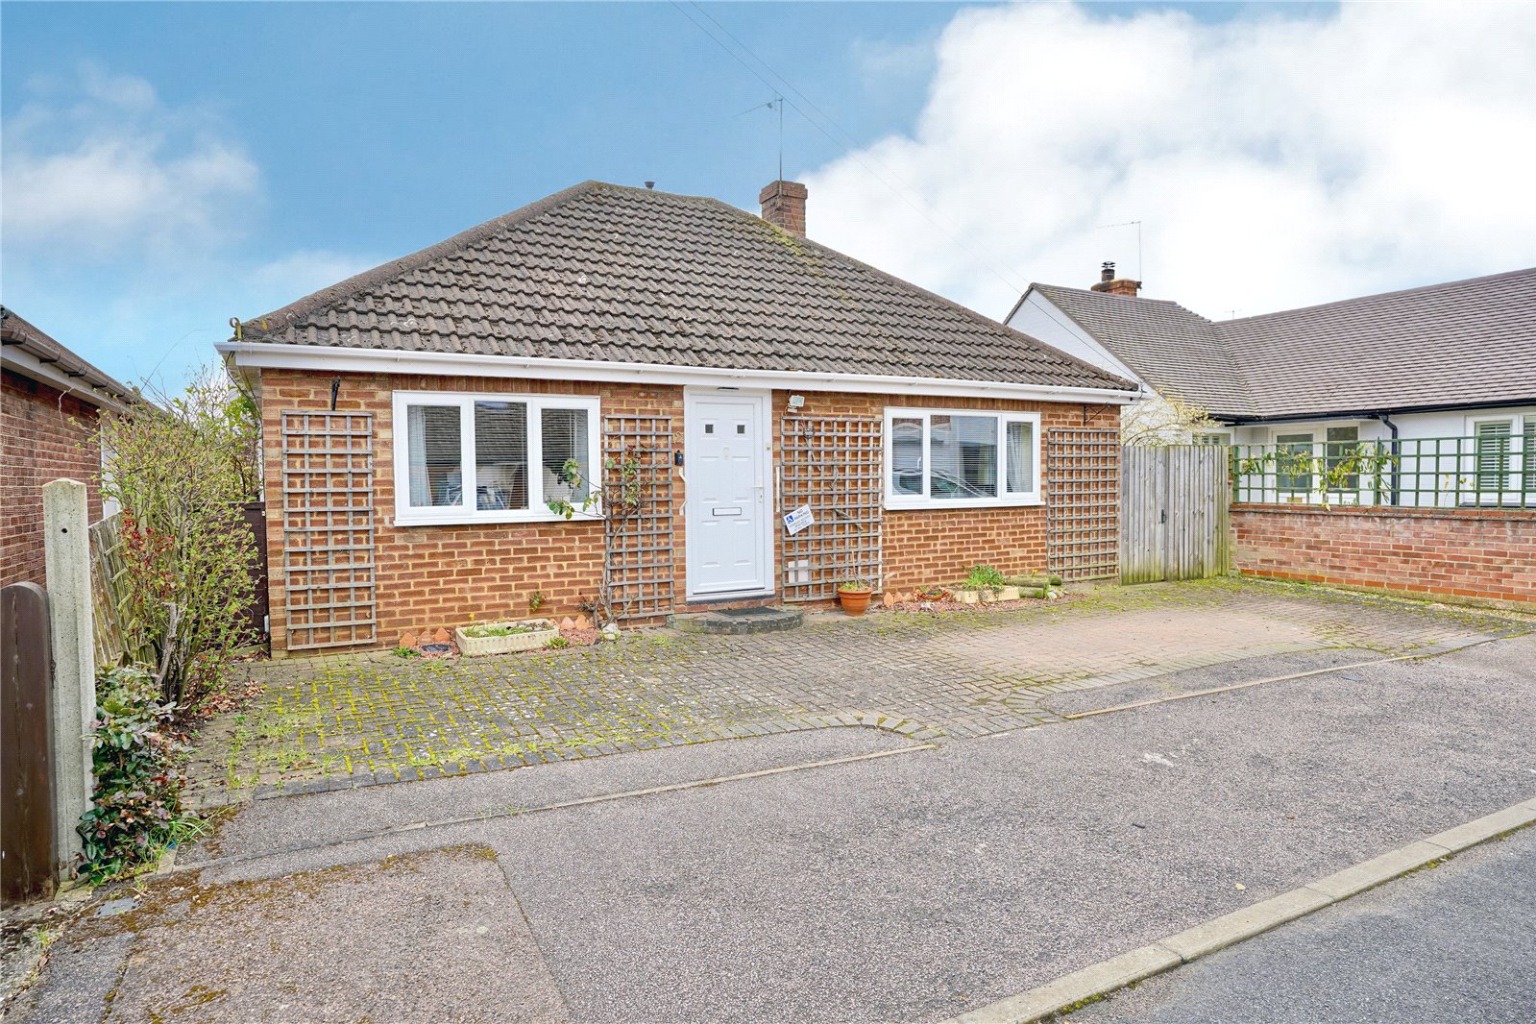 2 bed detached bungalow for sale in Parkway, St. Neots - Property Image 1